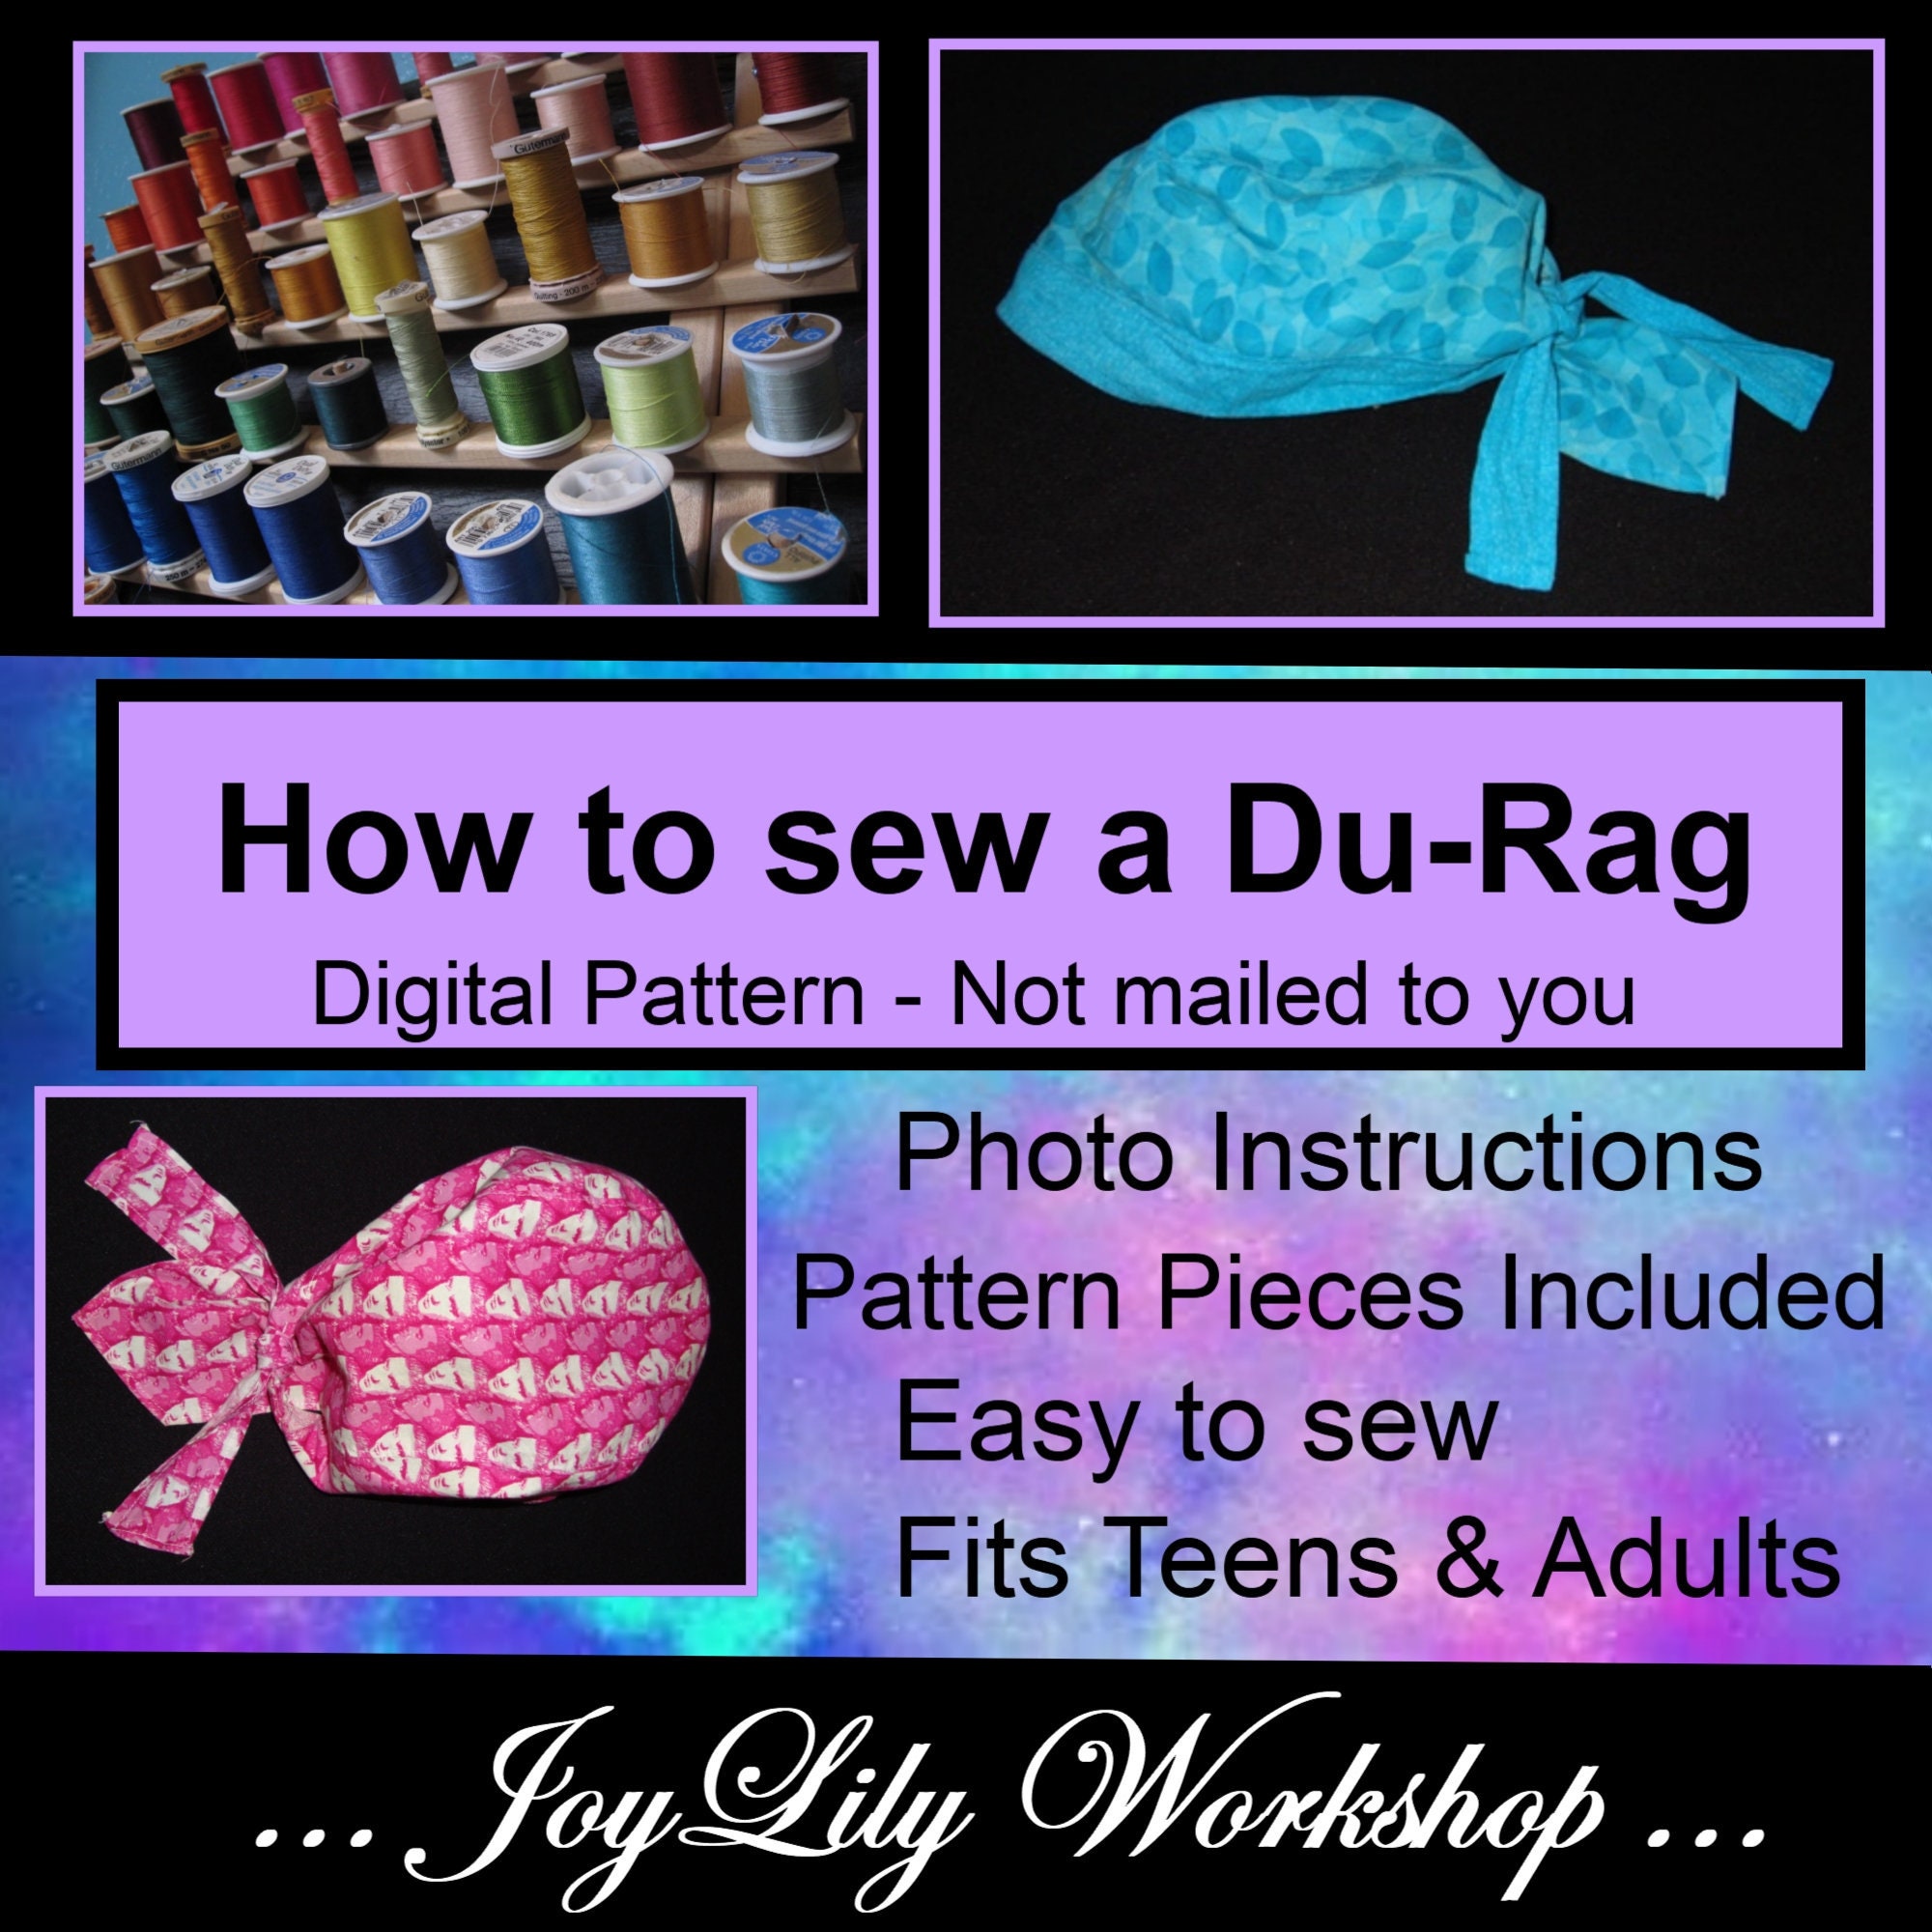 36-designs-sewing-pattern-for-a-durag-thomsonjemba